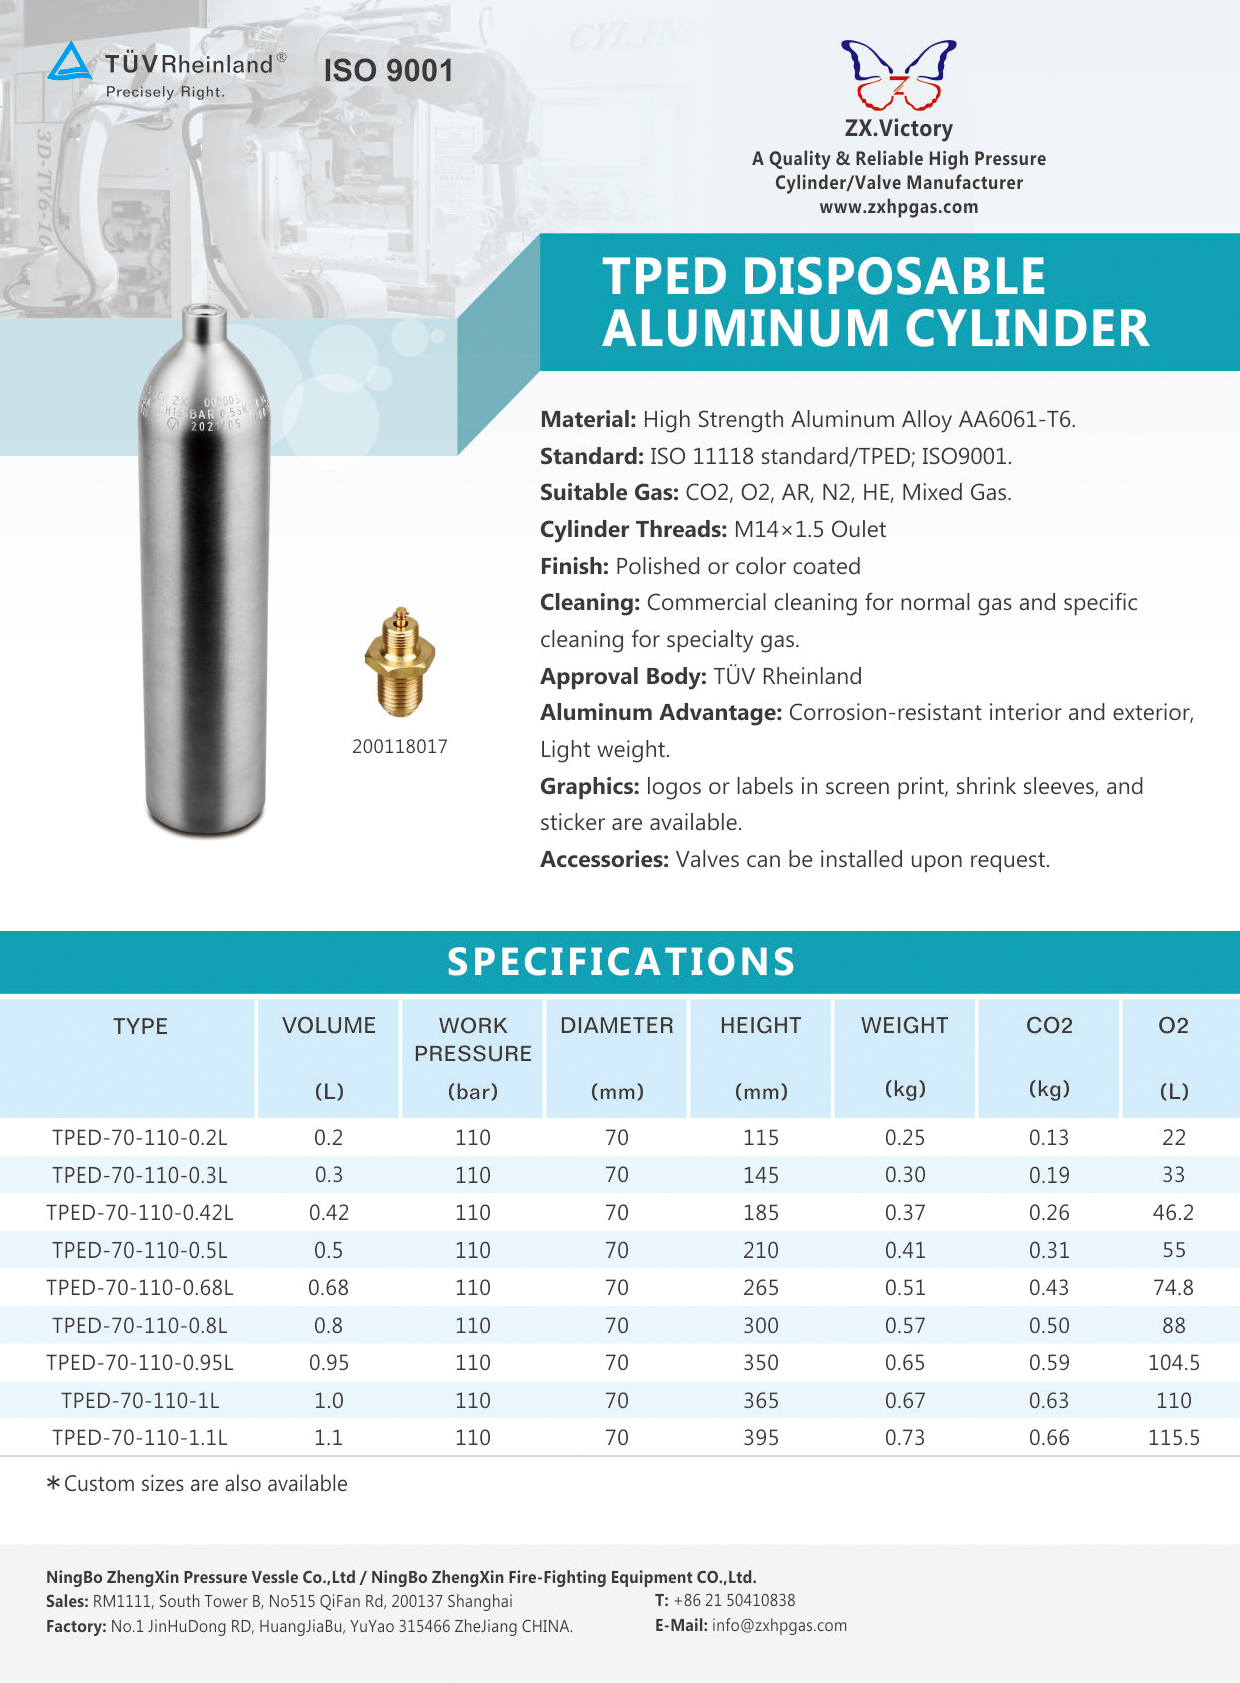 TPED Disposable Cylinder 2